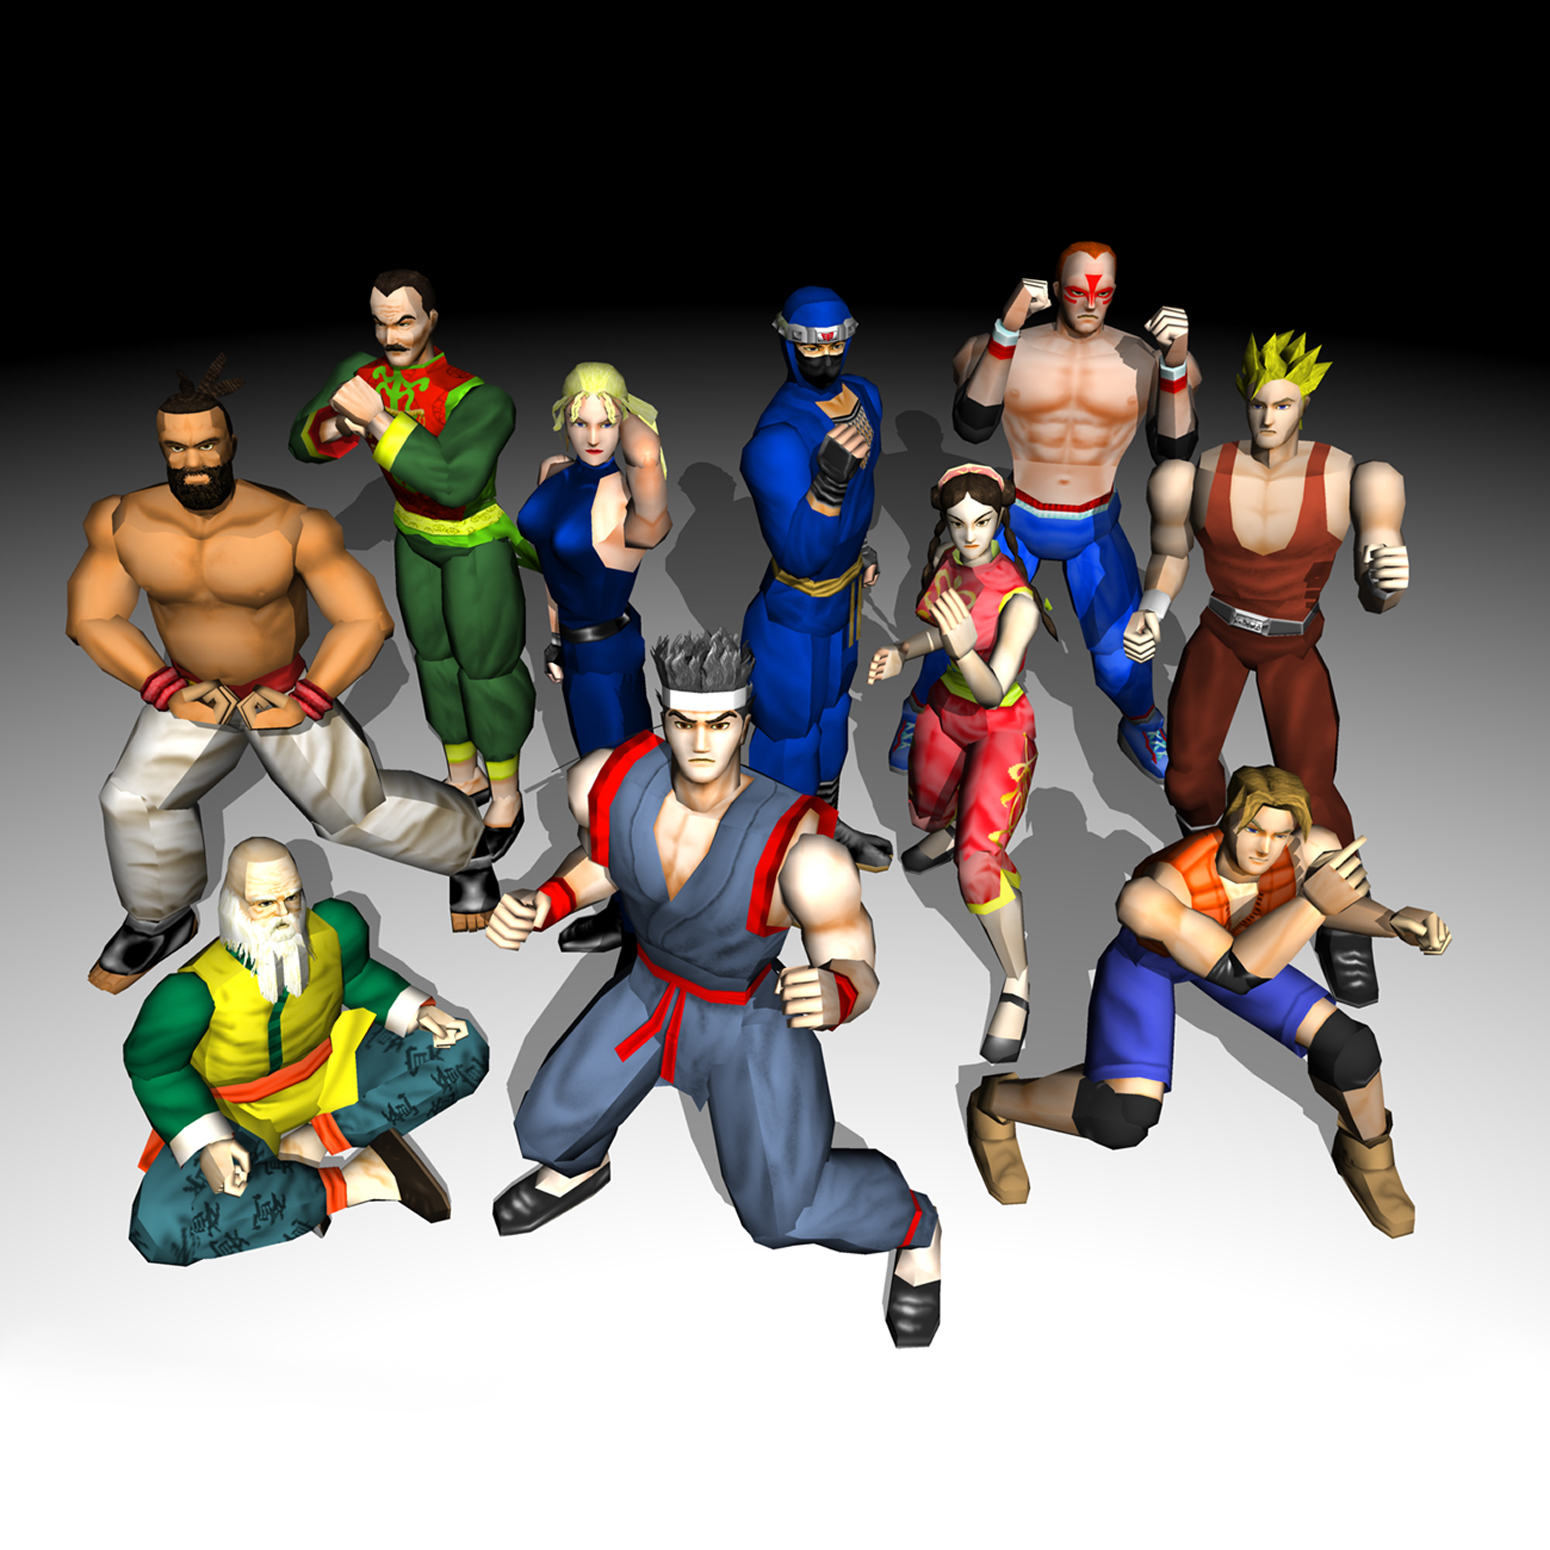 virtua fighter 2 characters